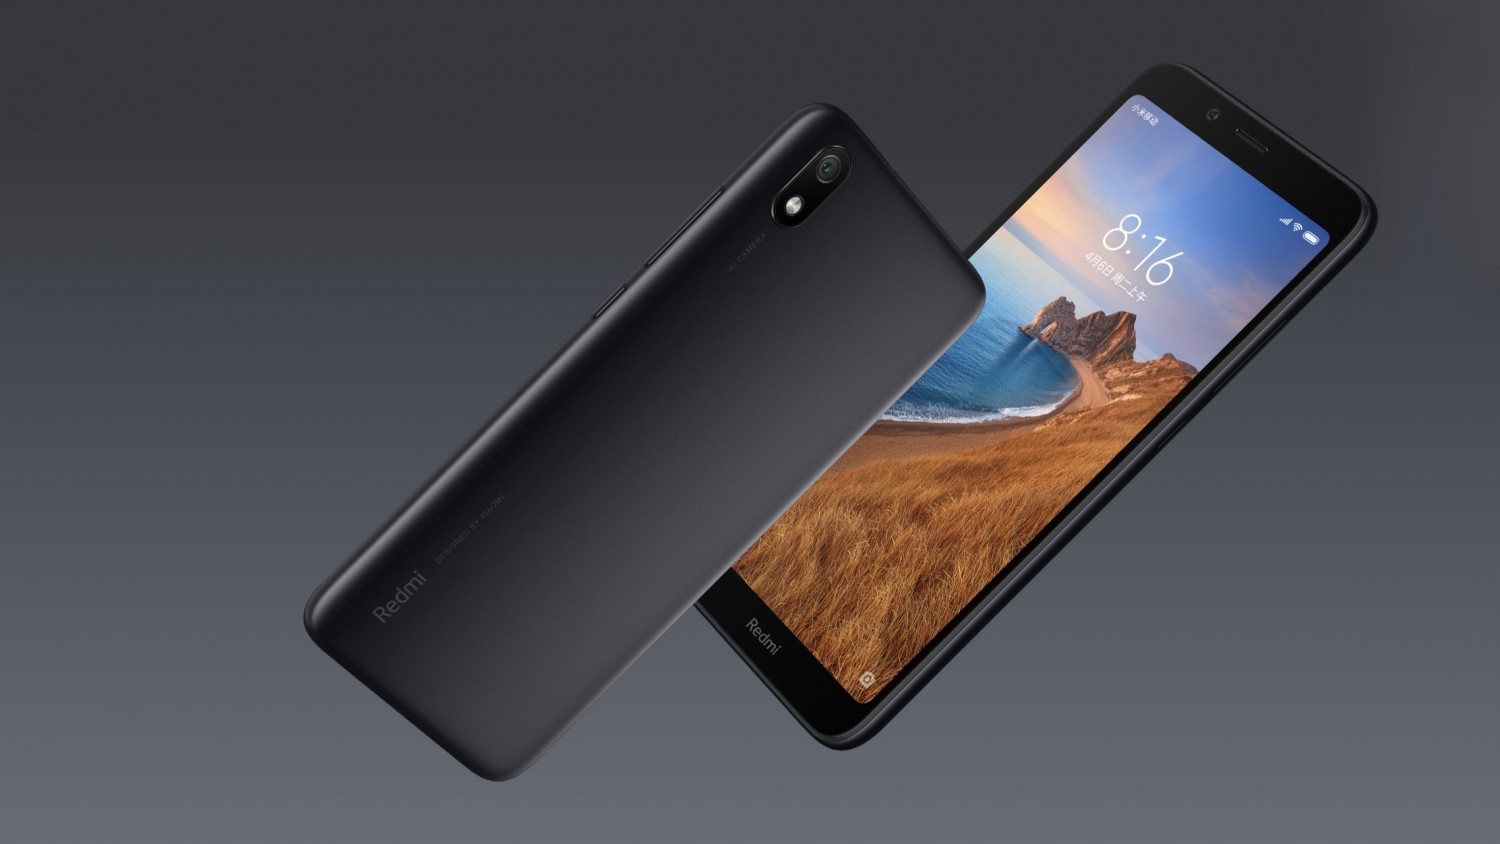 Budget smartphone 2019 Redmi 7A received MIUI 12.5. Looks like this is the last major update for it.